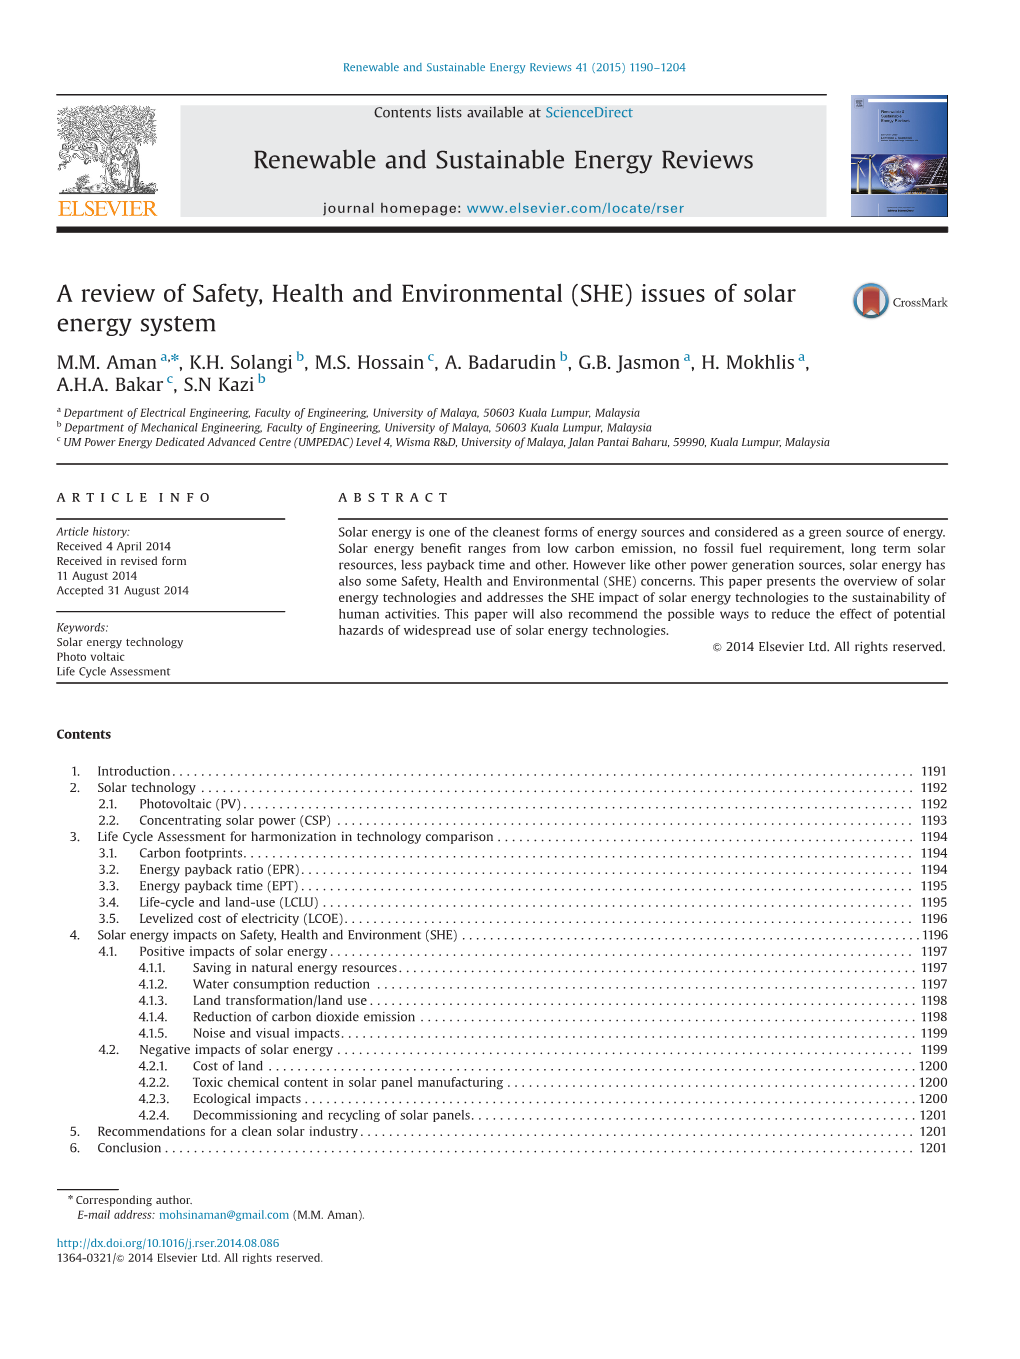 A Review of Safety, Health and Environmental (SHE) Issues of Solar Energy System